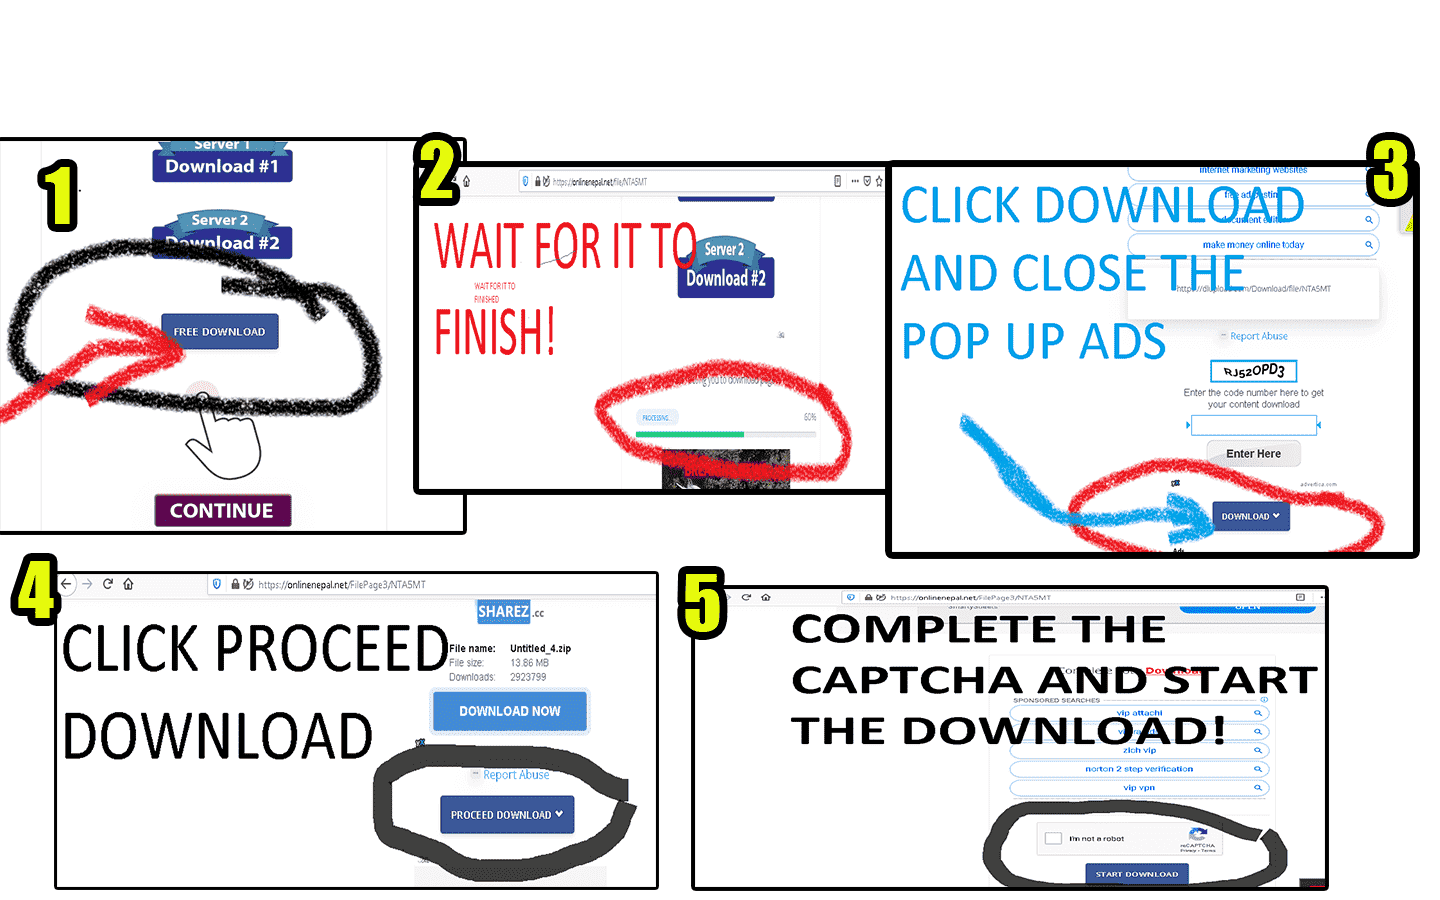 HOW TO DOWNLOAD.png